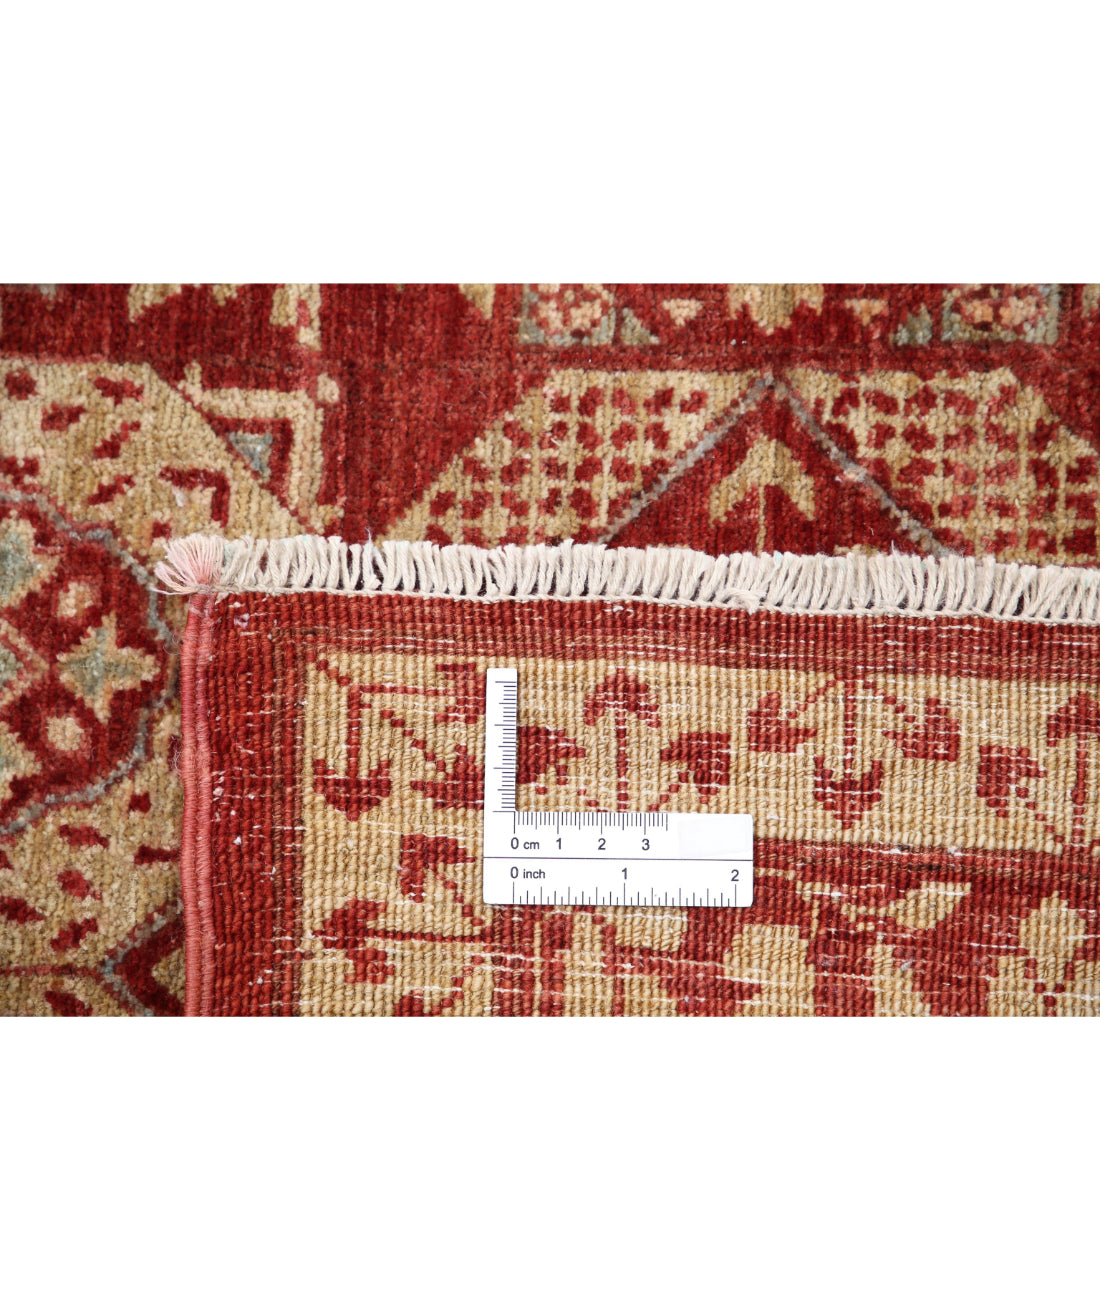 Hand Knotted Fine Mamluk Wool Rug - 8'6'' x 11'9'' 8'6'' x 11'9'' (255 X 353) / Red / Ivory